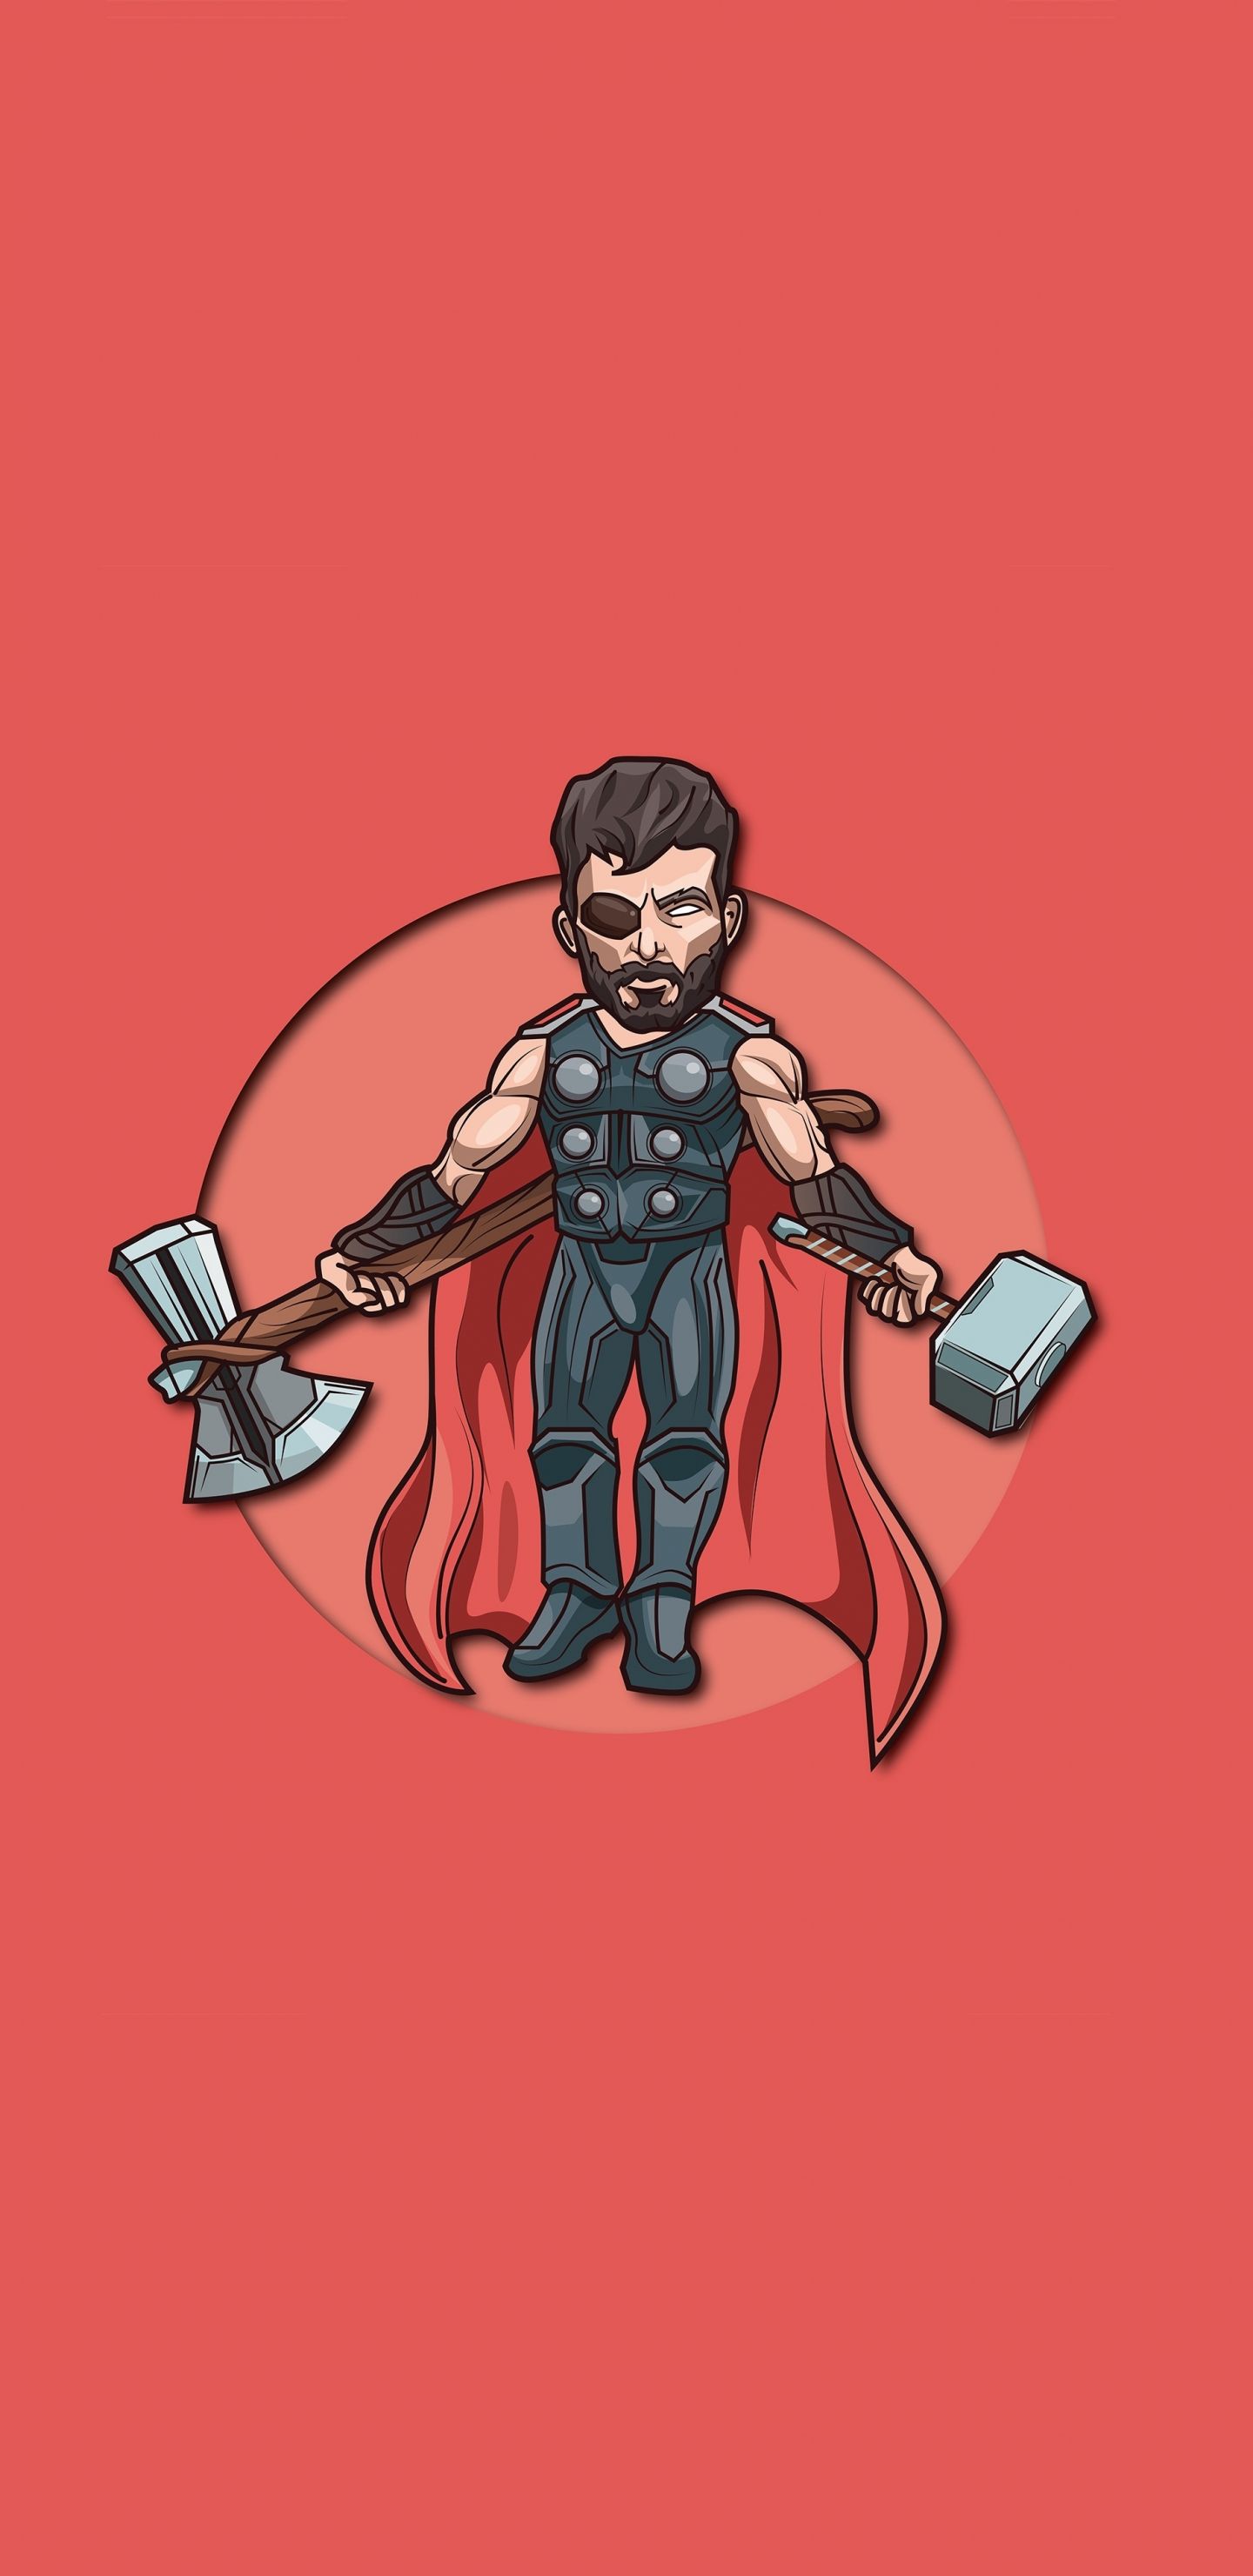 Thor, the mighty Avenger, with his hammer and cape - Thor